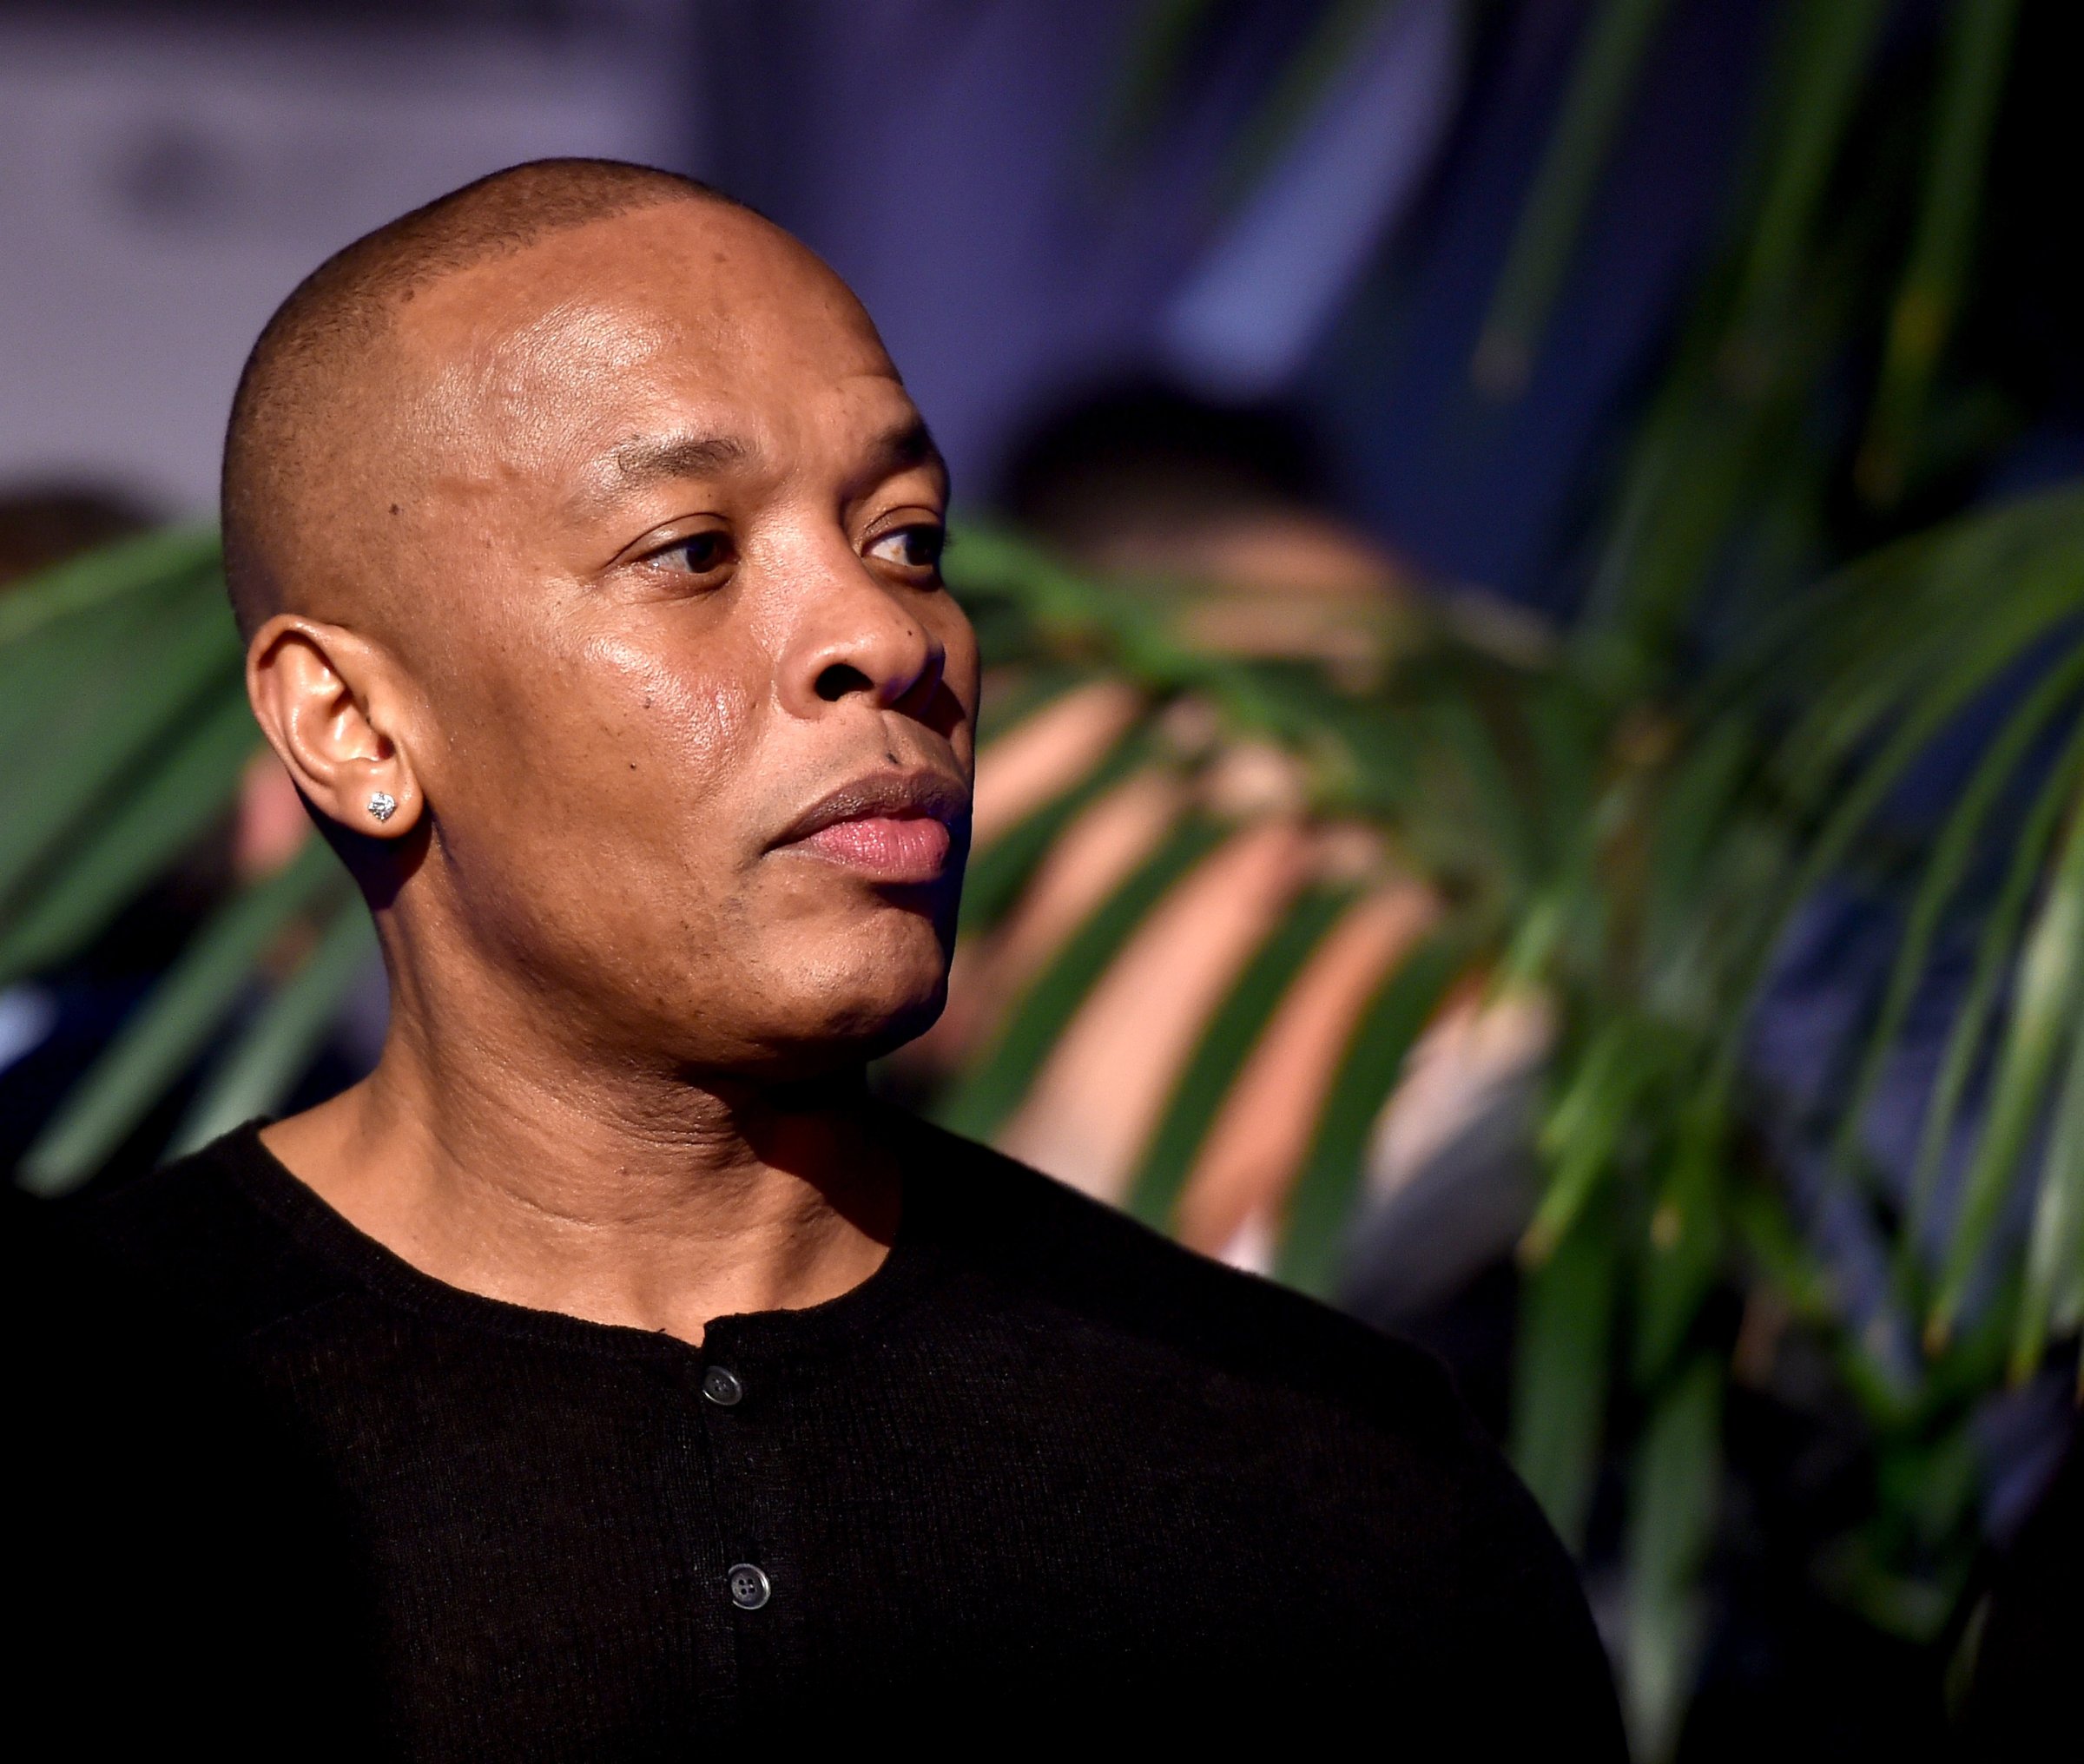 Dr. Dre at the after party for the premiere of Universal Pictures and Legendary Pictures' "Straight Outta Compton."